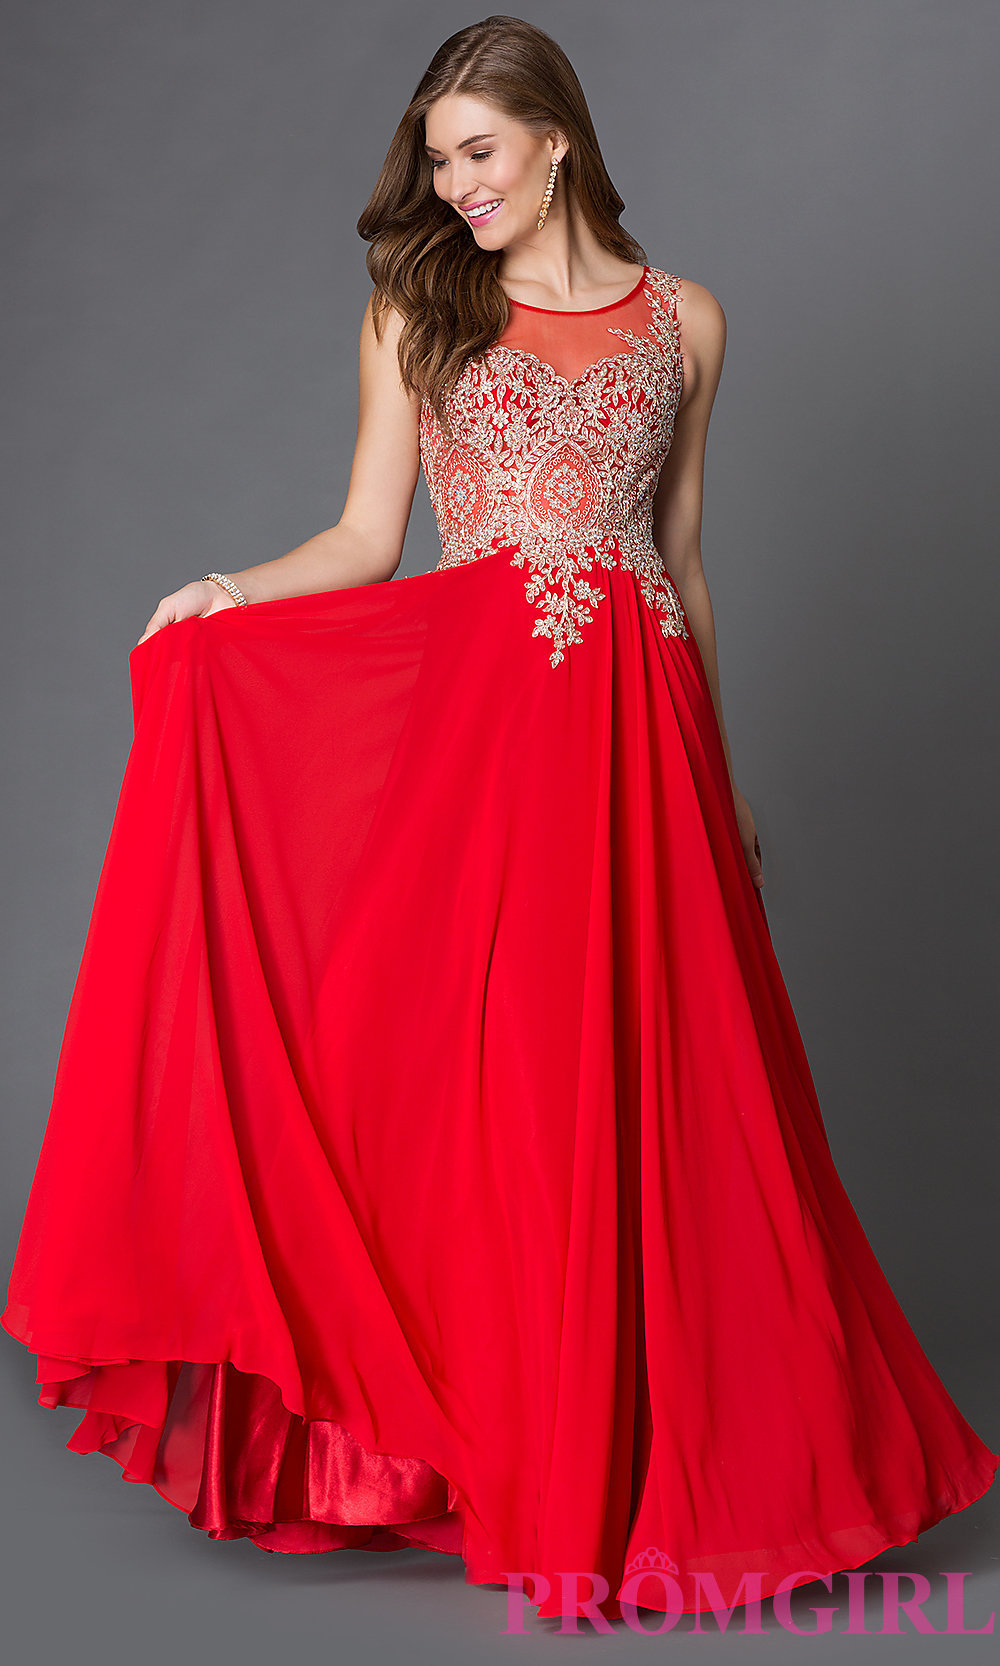 Red prom dress is the way to go this valentines